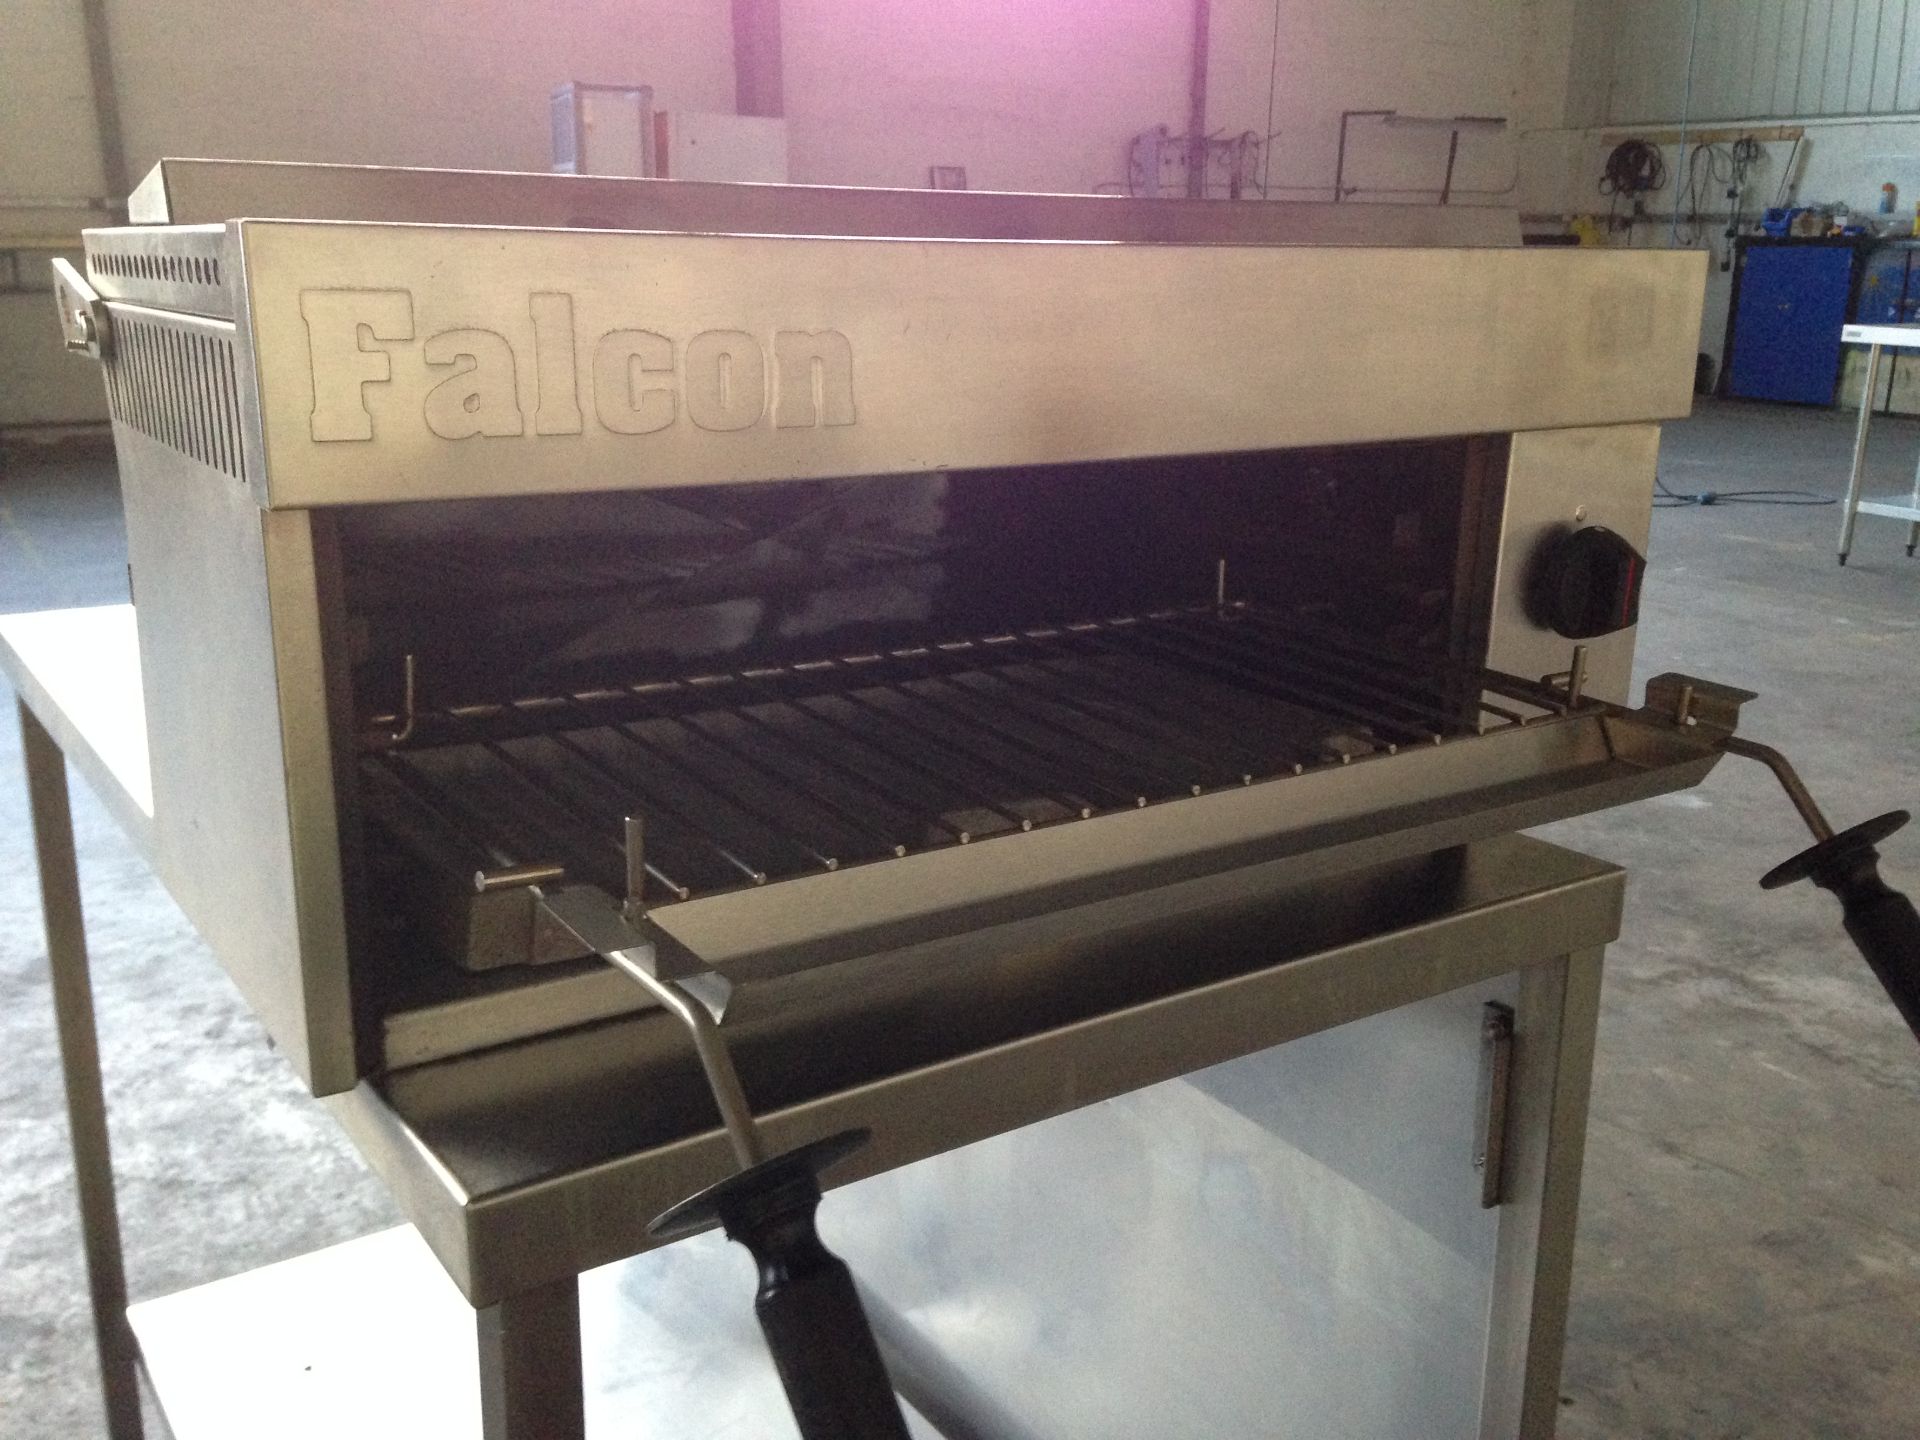 FALCON DOMINATOR G2532 SALAMANDER GRILL: Power Rating of 7.3kW - Stainless Steel Exterior with Five